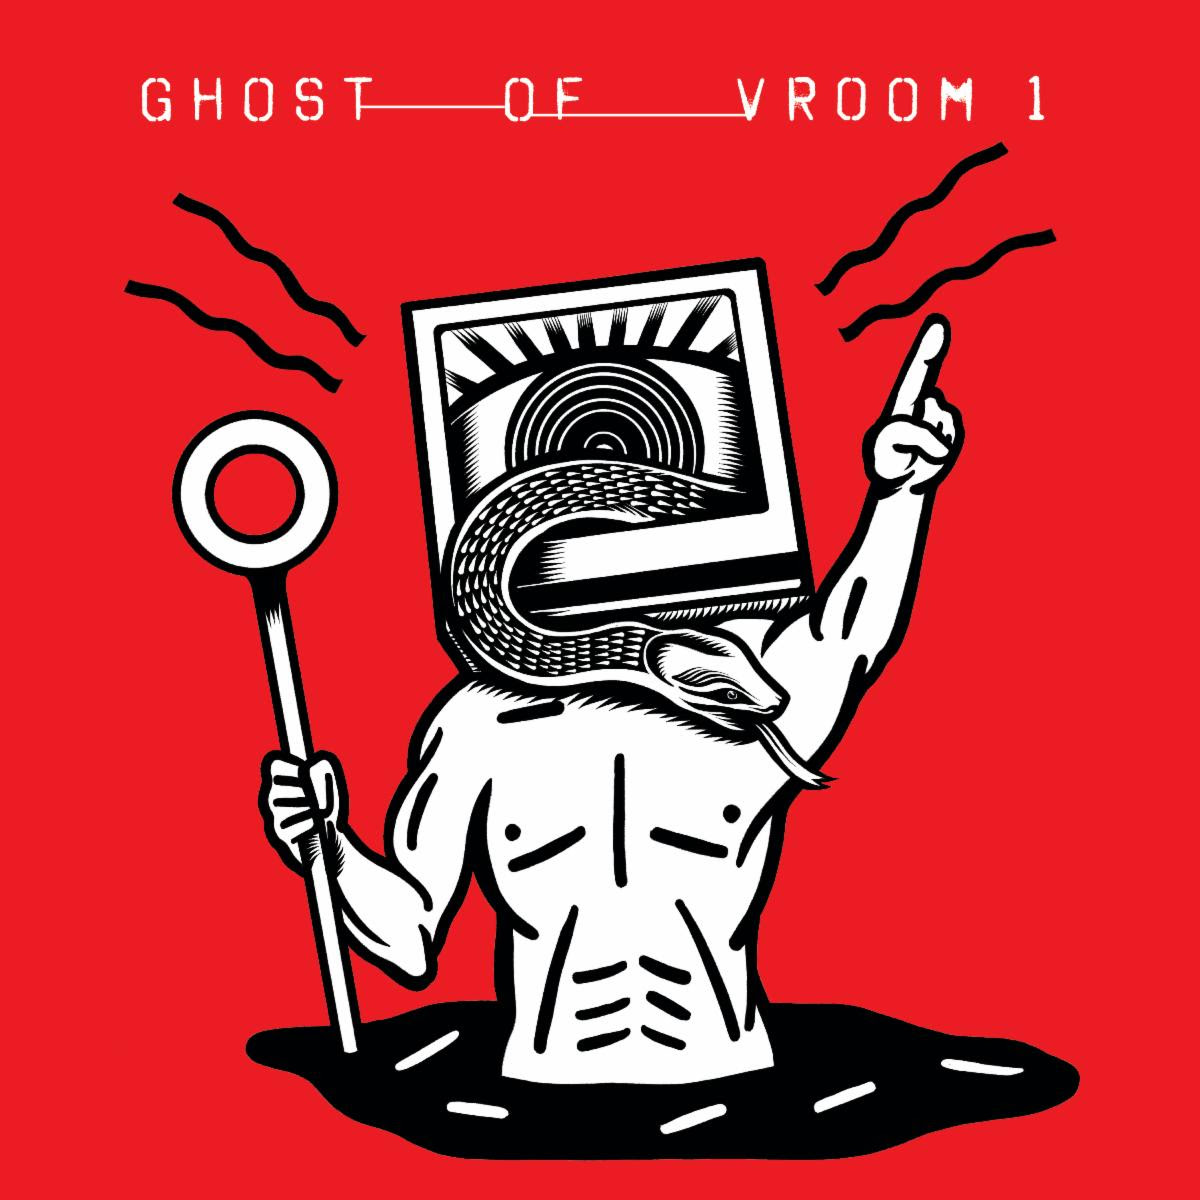 GHOST OF VROOM GHOST OF VROOM 1 (Release Date: March 19, 2021)